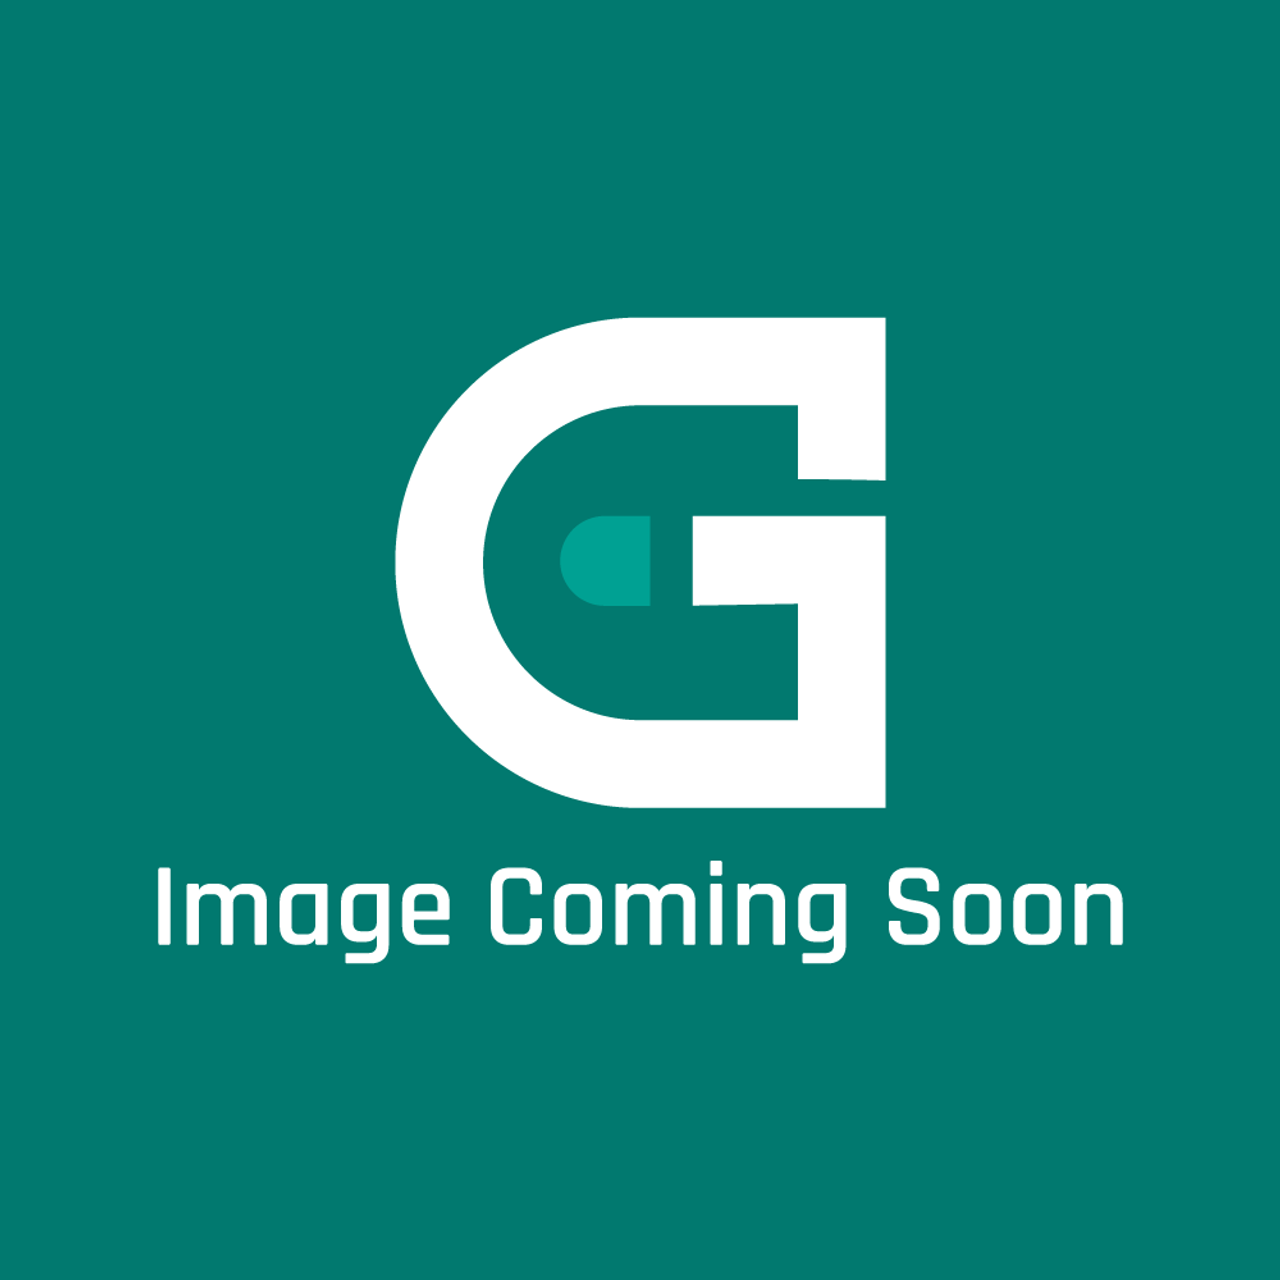 AGA Marvel RO4M342255 - Insul.Set:Cooker Chmbr (Inner) (Crn1711) - Image Coming Soon!